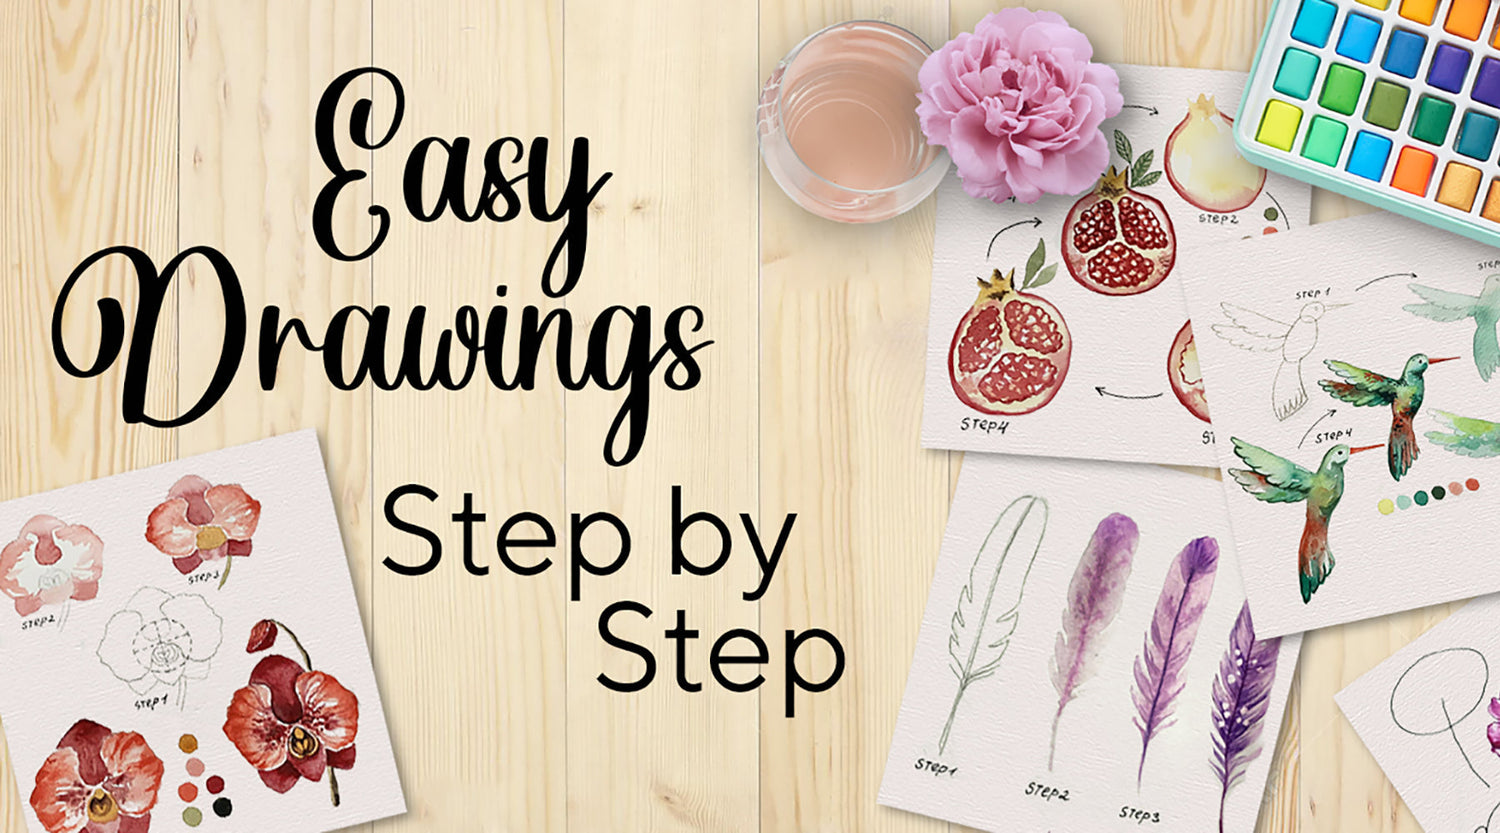 Easy Elephant Drawing- Step by Step Printable - Crafty Morning